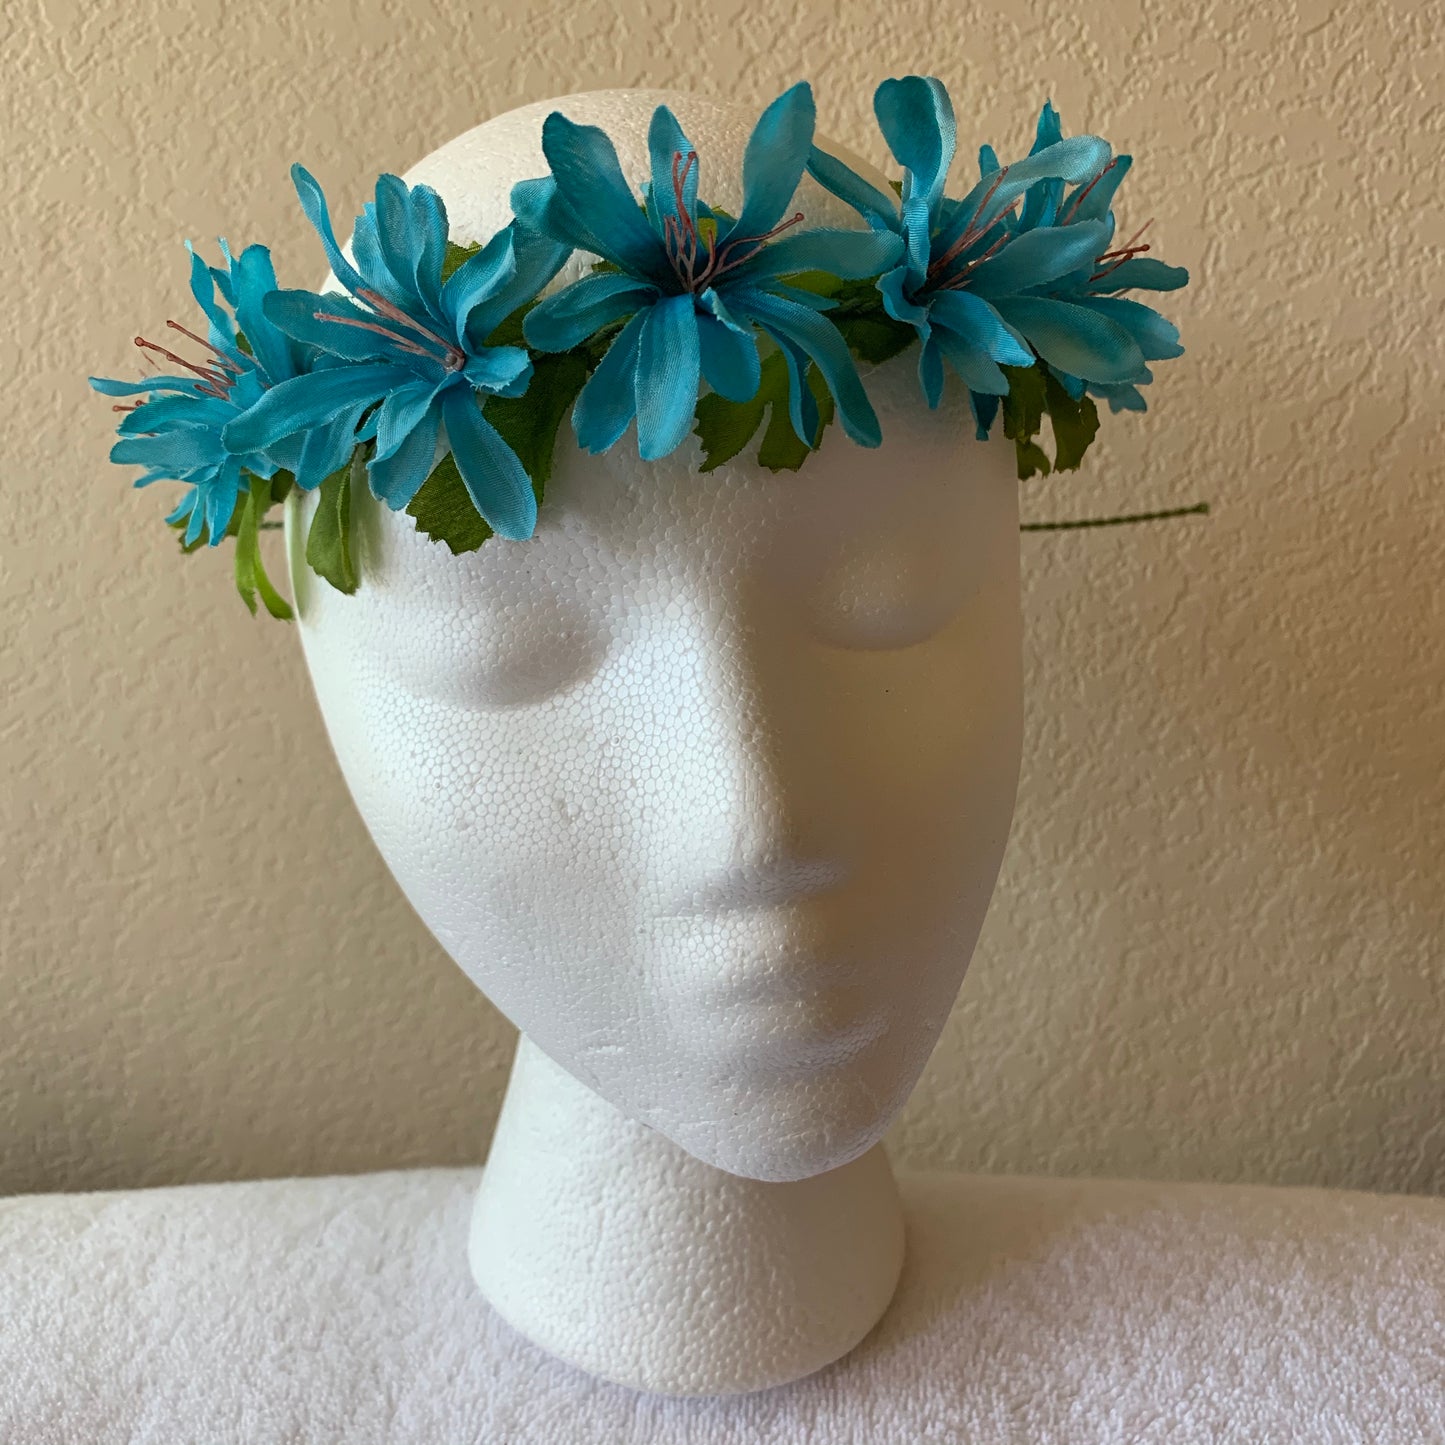 Extra Small Wreath - Teal Pointy Flowers